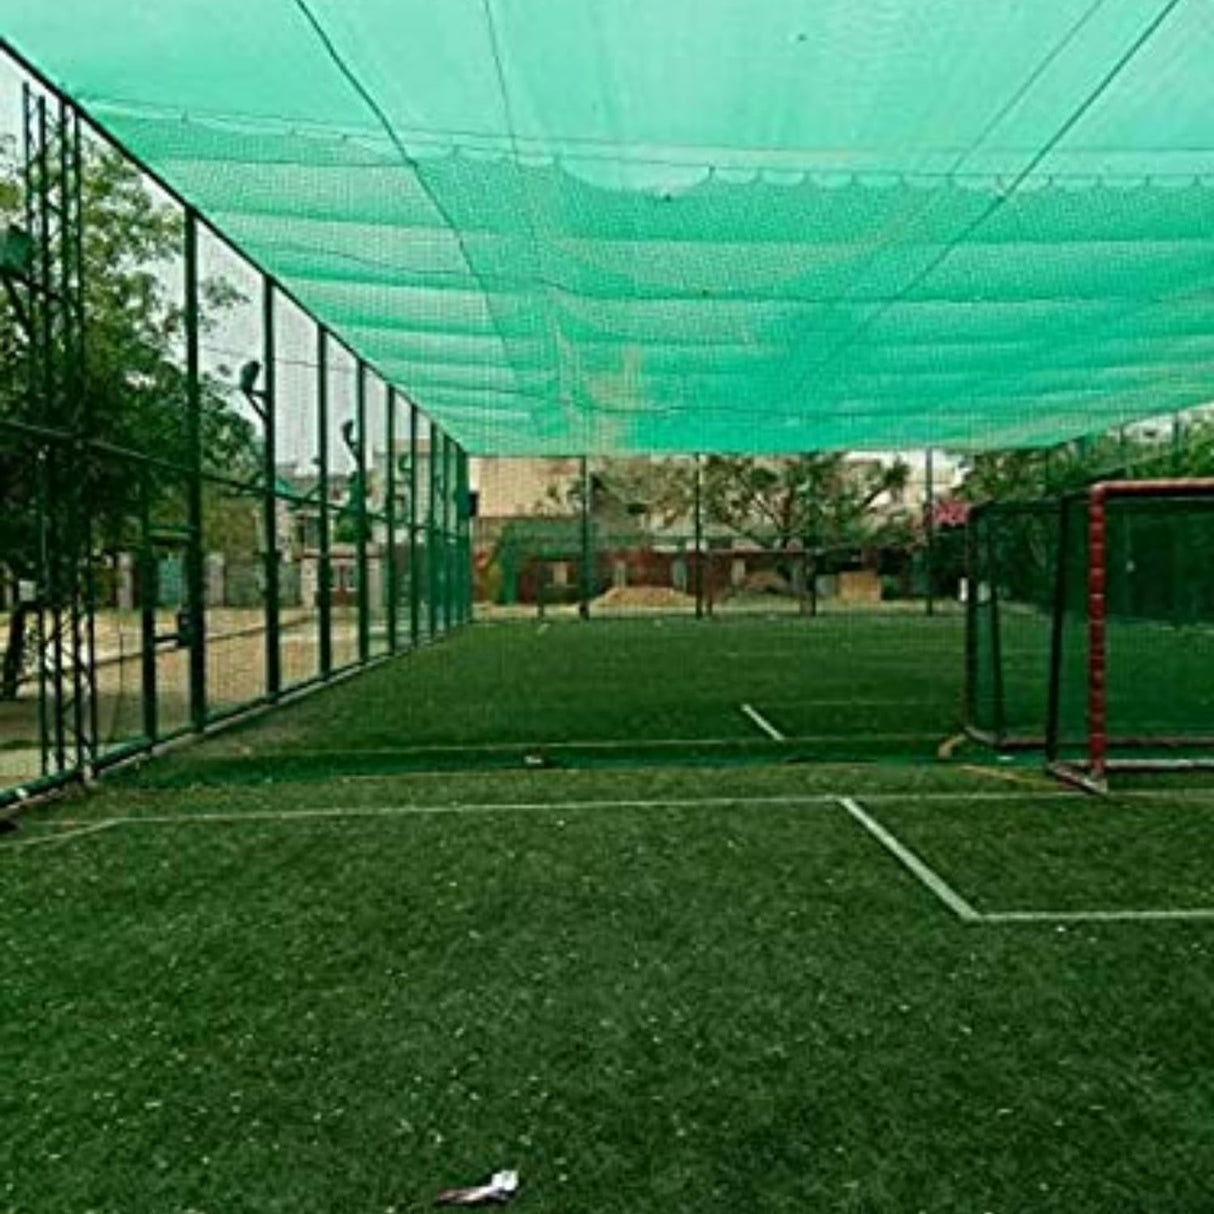 Singhal HDPE Nets Green Shade Net 50% UV Protected 3 Meter x 5 Meter for Floriculture, Ornamental Plants, Gardening Multipurpose with Attached Eyelets on Every Meter